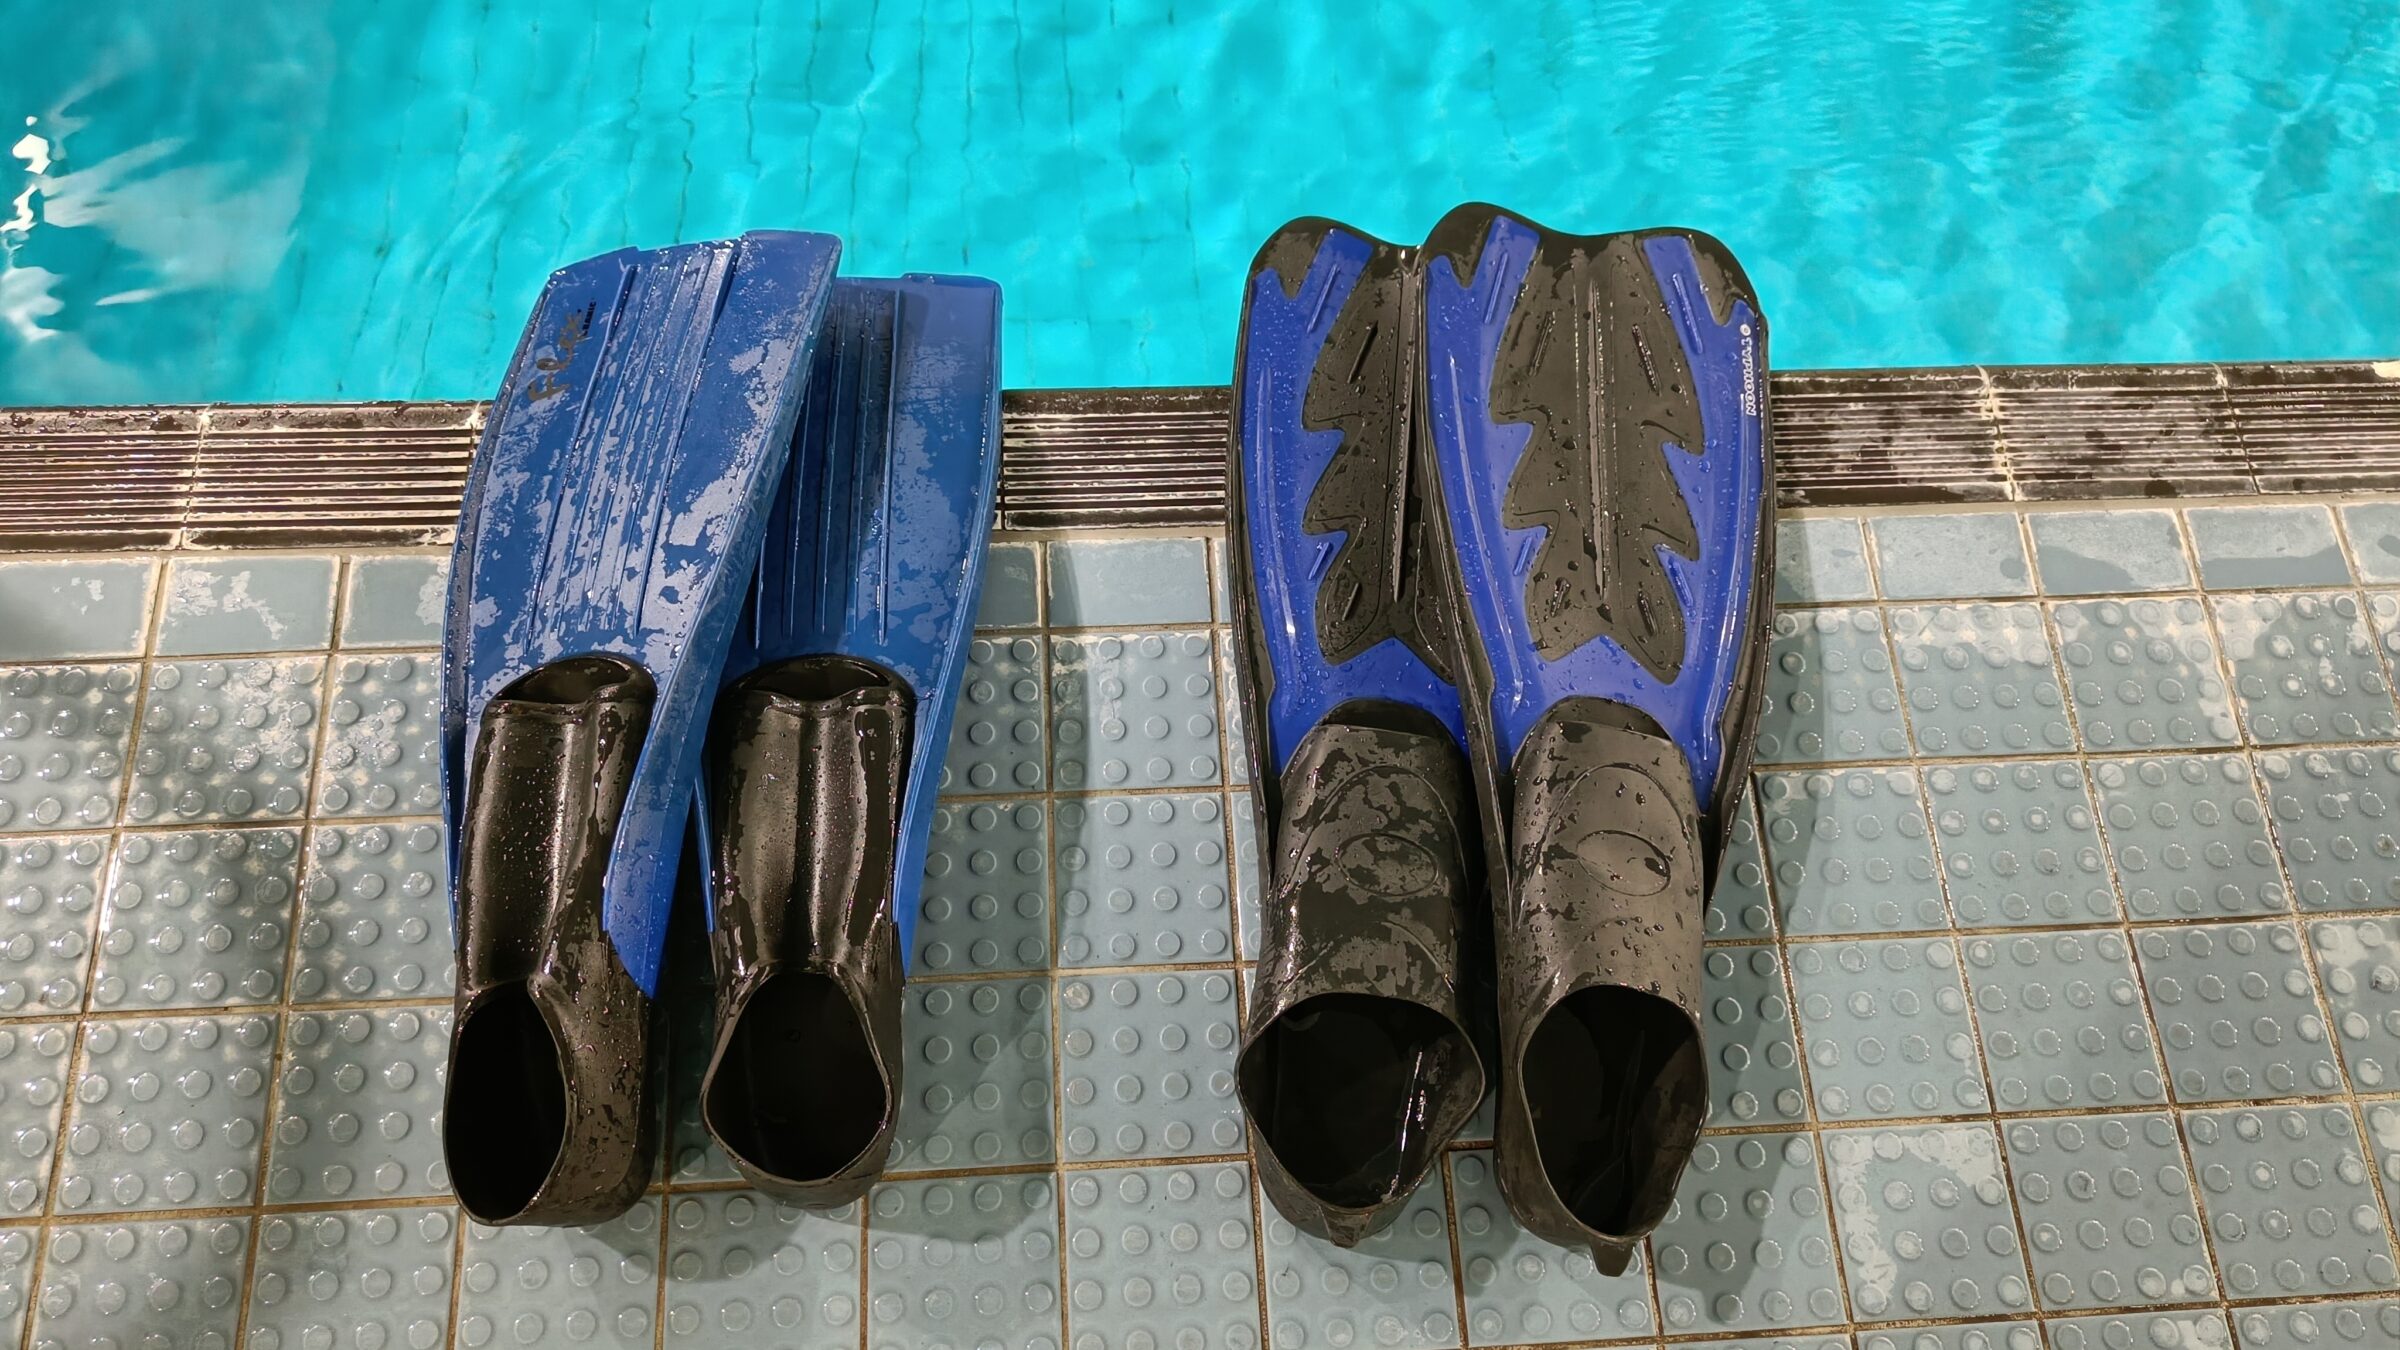 Two pairs of fins ready on the poolside